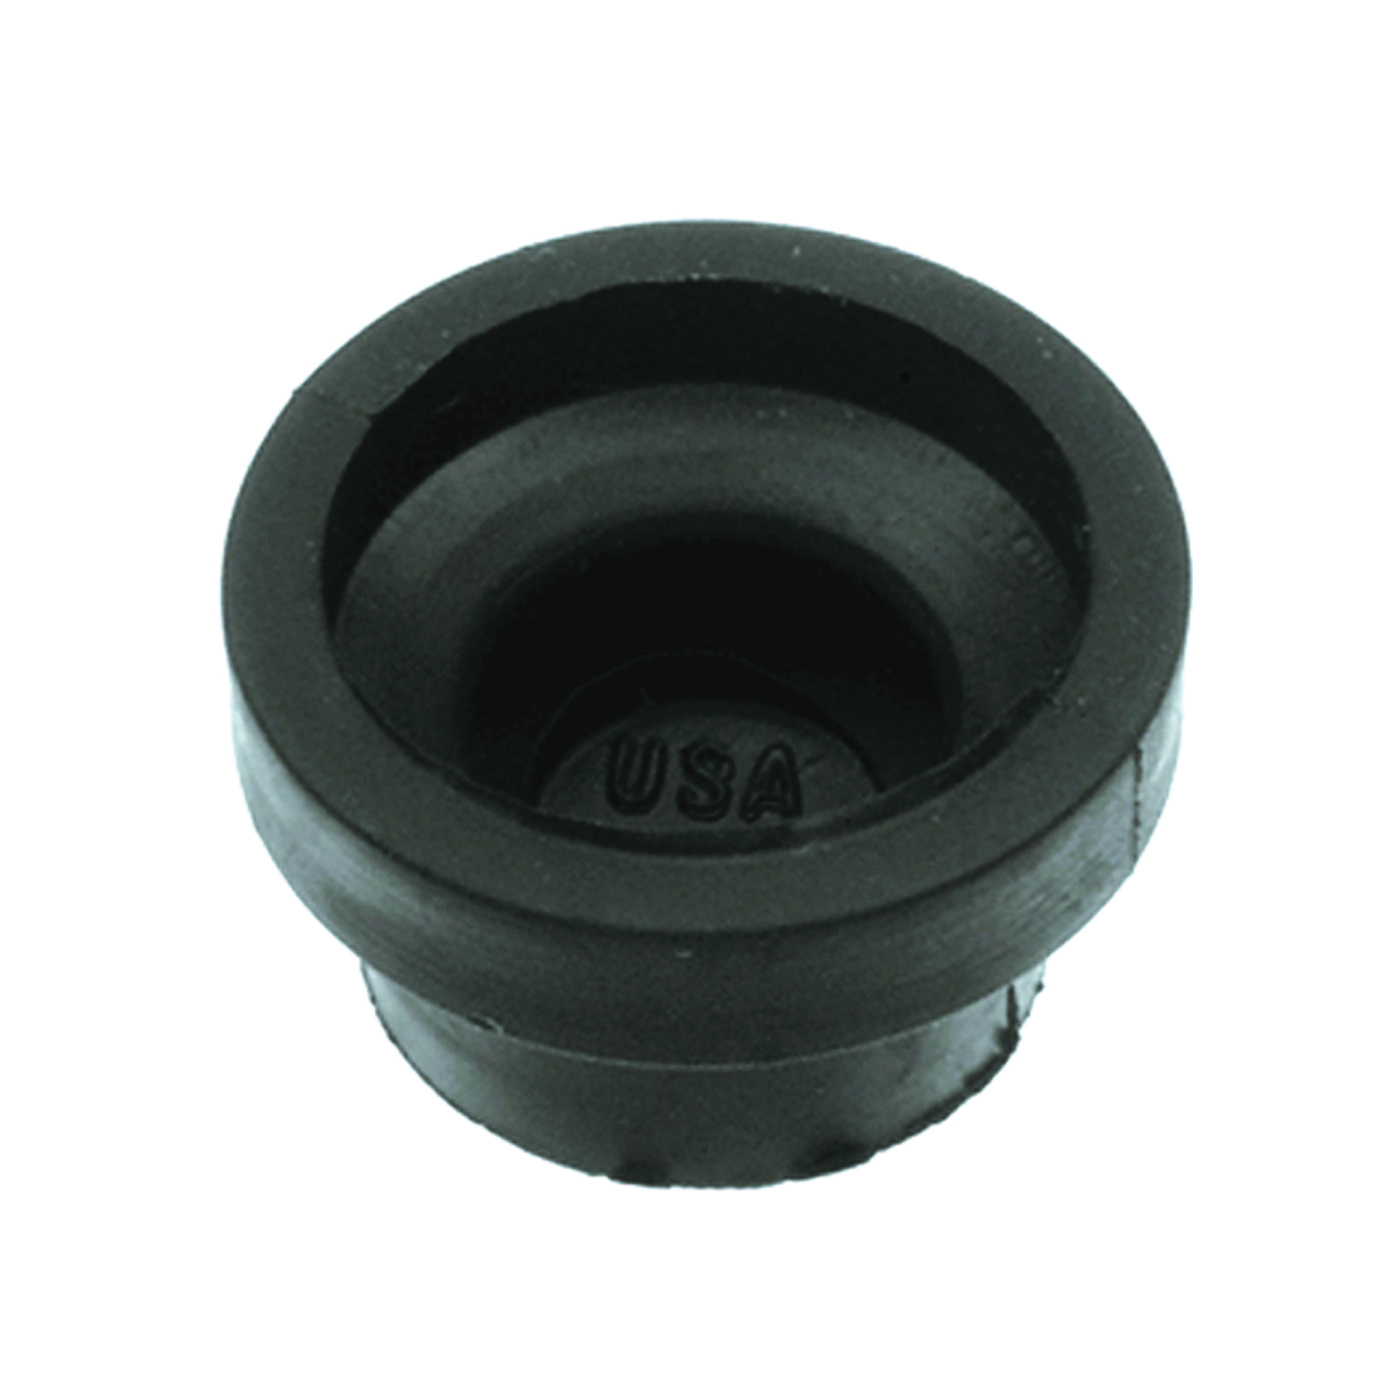 80410 Diaphragm Washer, 1/2 in ID x 11/16 in OD Dia, Rubber, For: American Standard Aqua-Seal Faucets